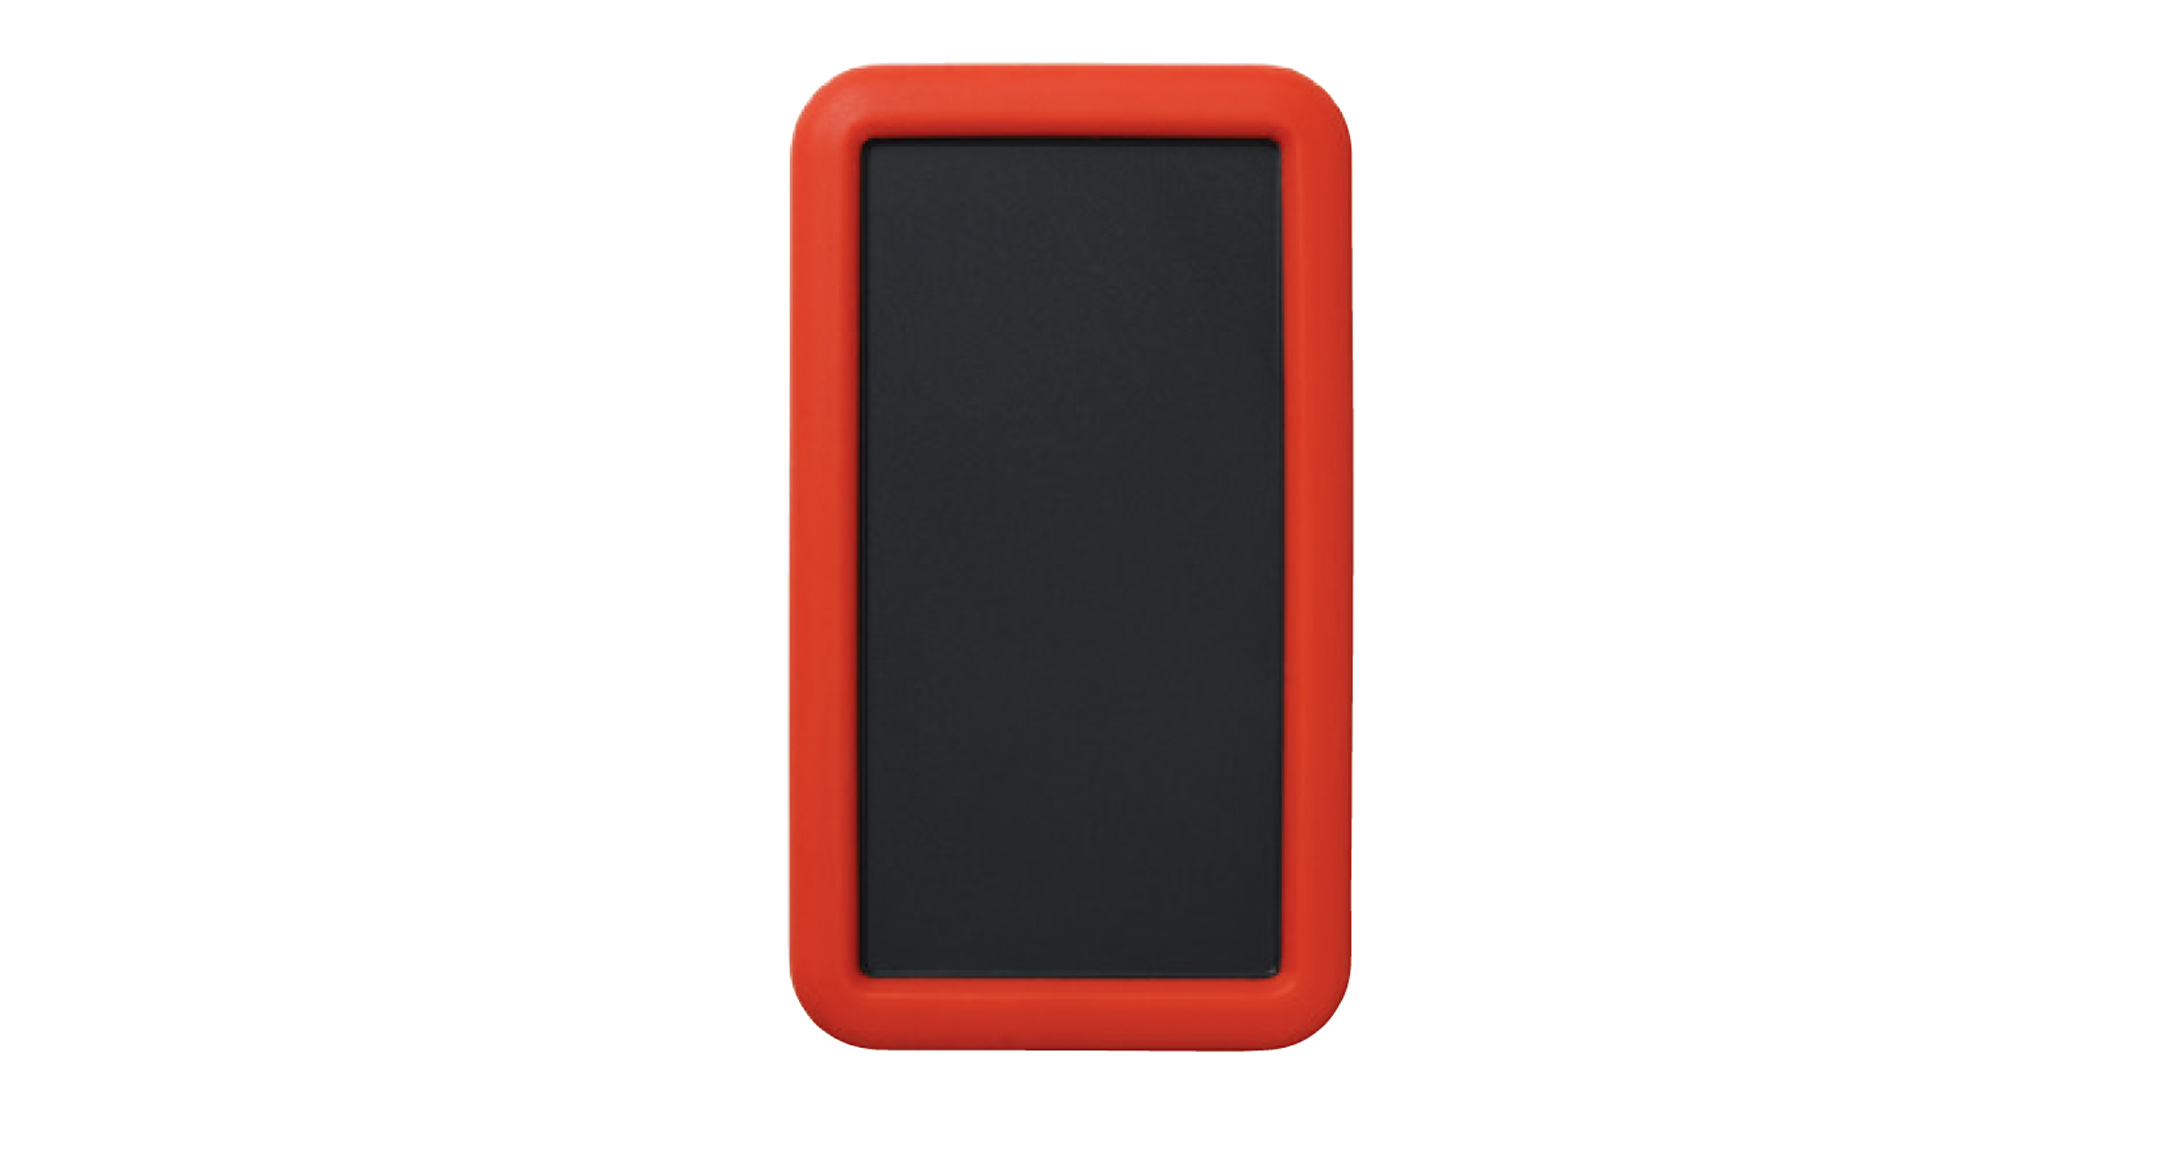 HANDHELD CASE with SILICONE COVER - LCS series:Dark gray/Red